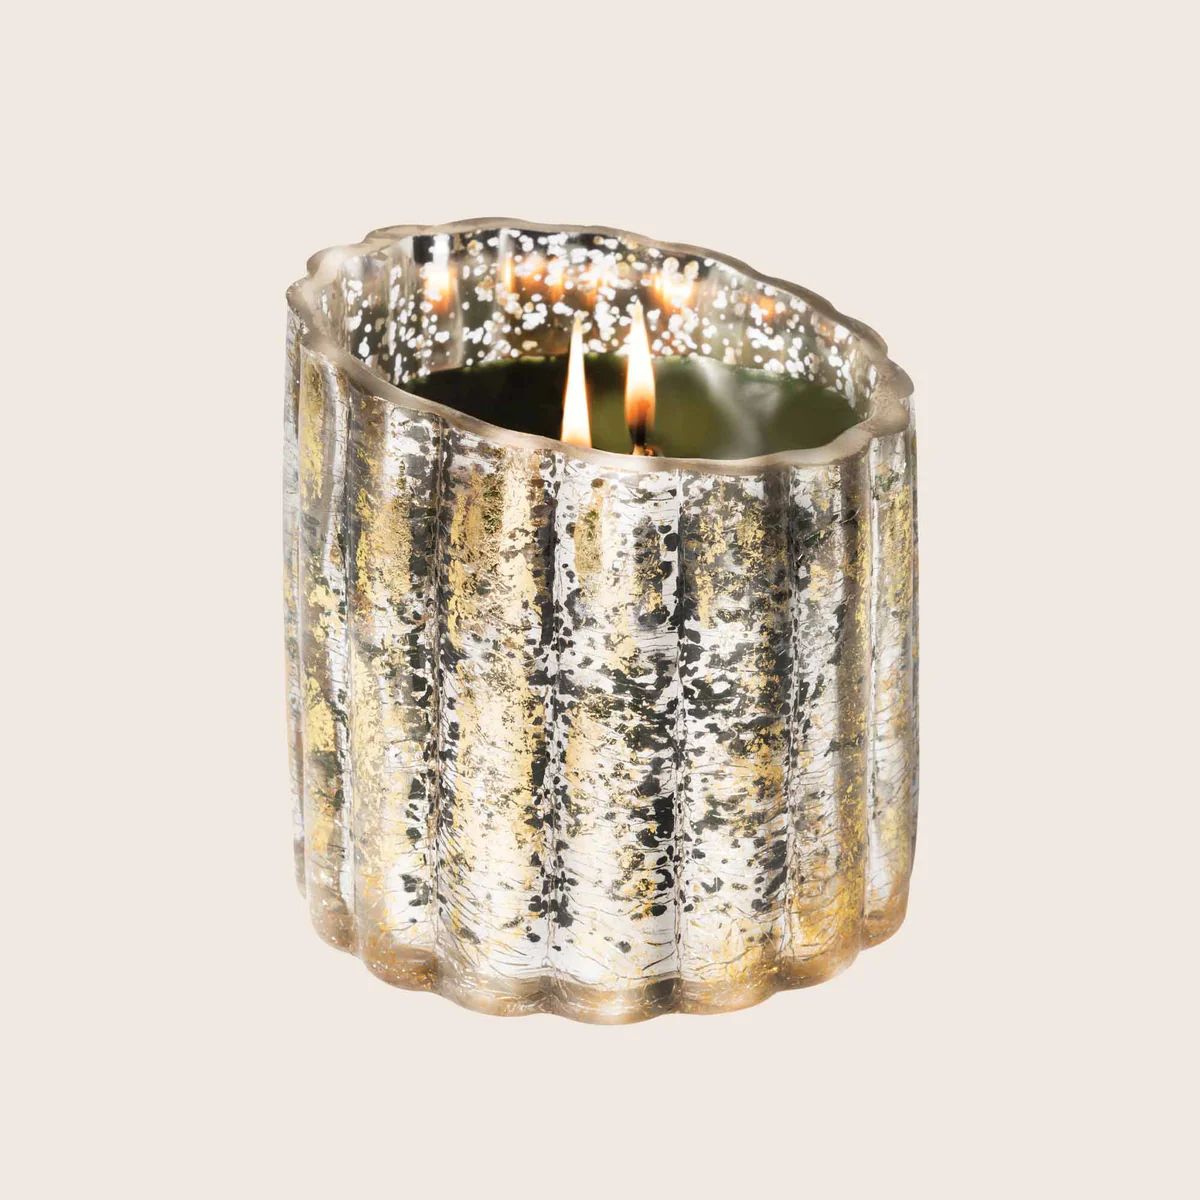 The Smell of Tree - Gilded Tilted Candle | Aromatique